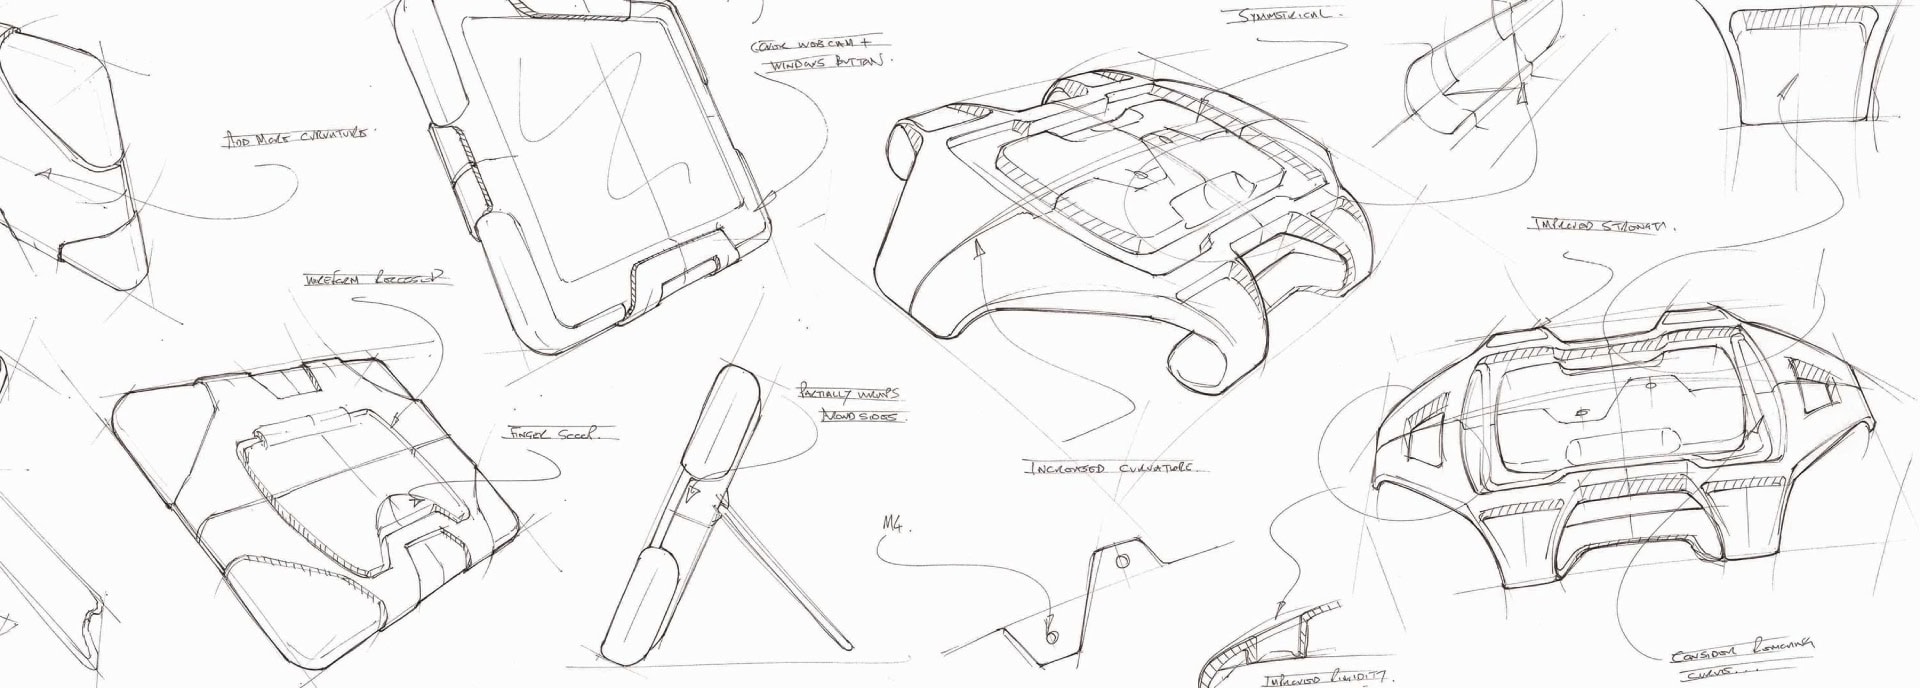 Tablet case concept drawings